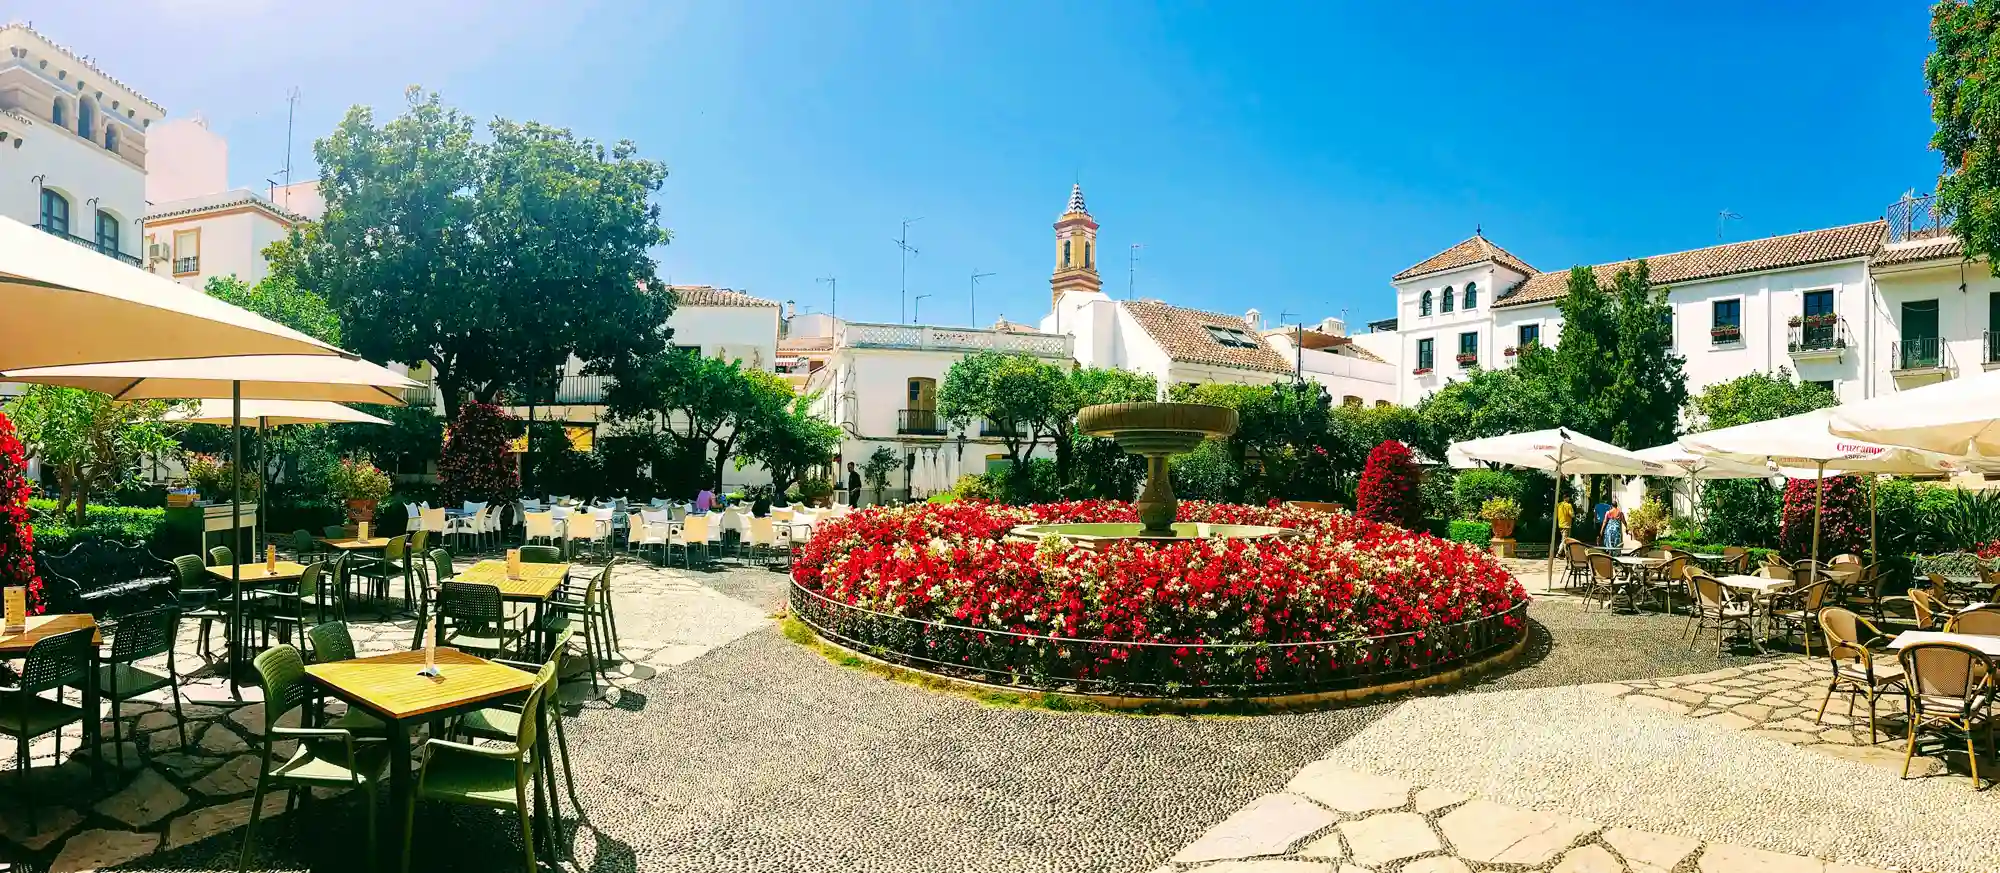 Things to Do in Estepona